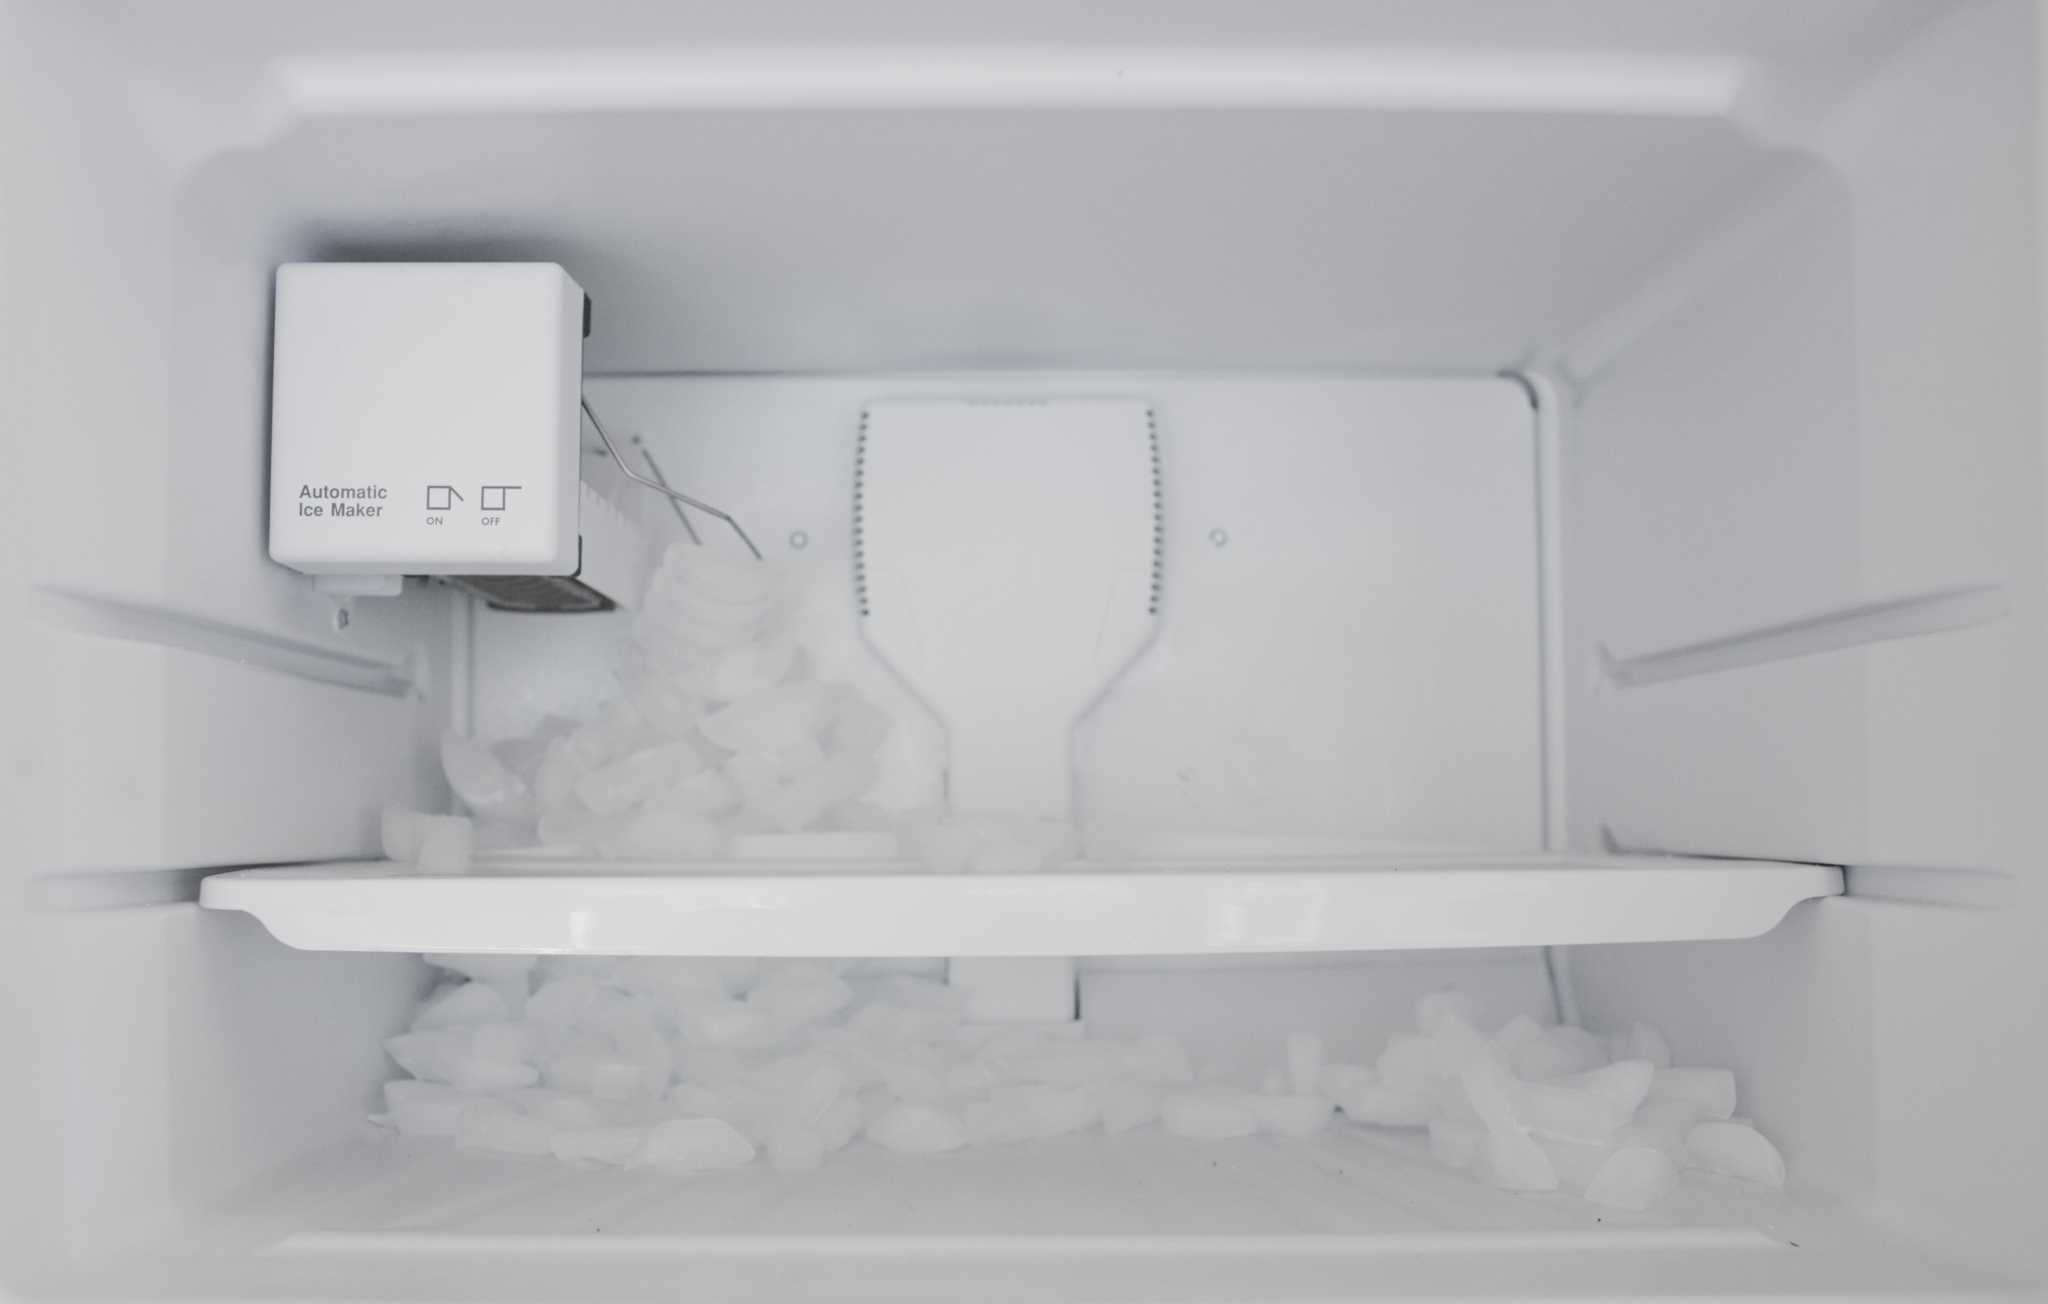 Tips To Make Sure the Ice in Your Freezer is Clean - Health Beat